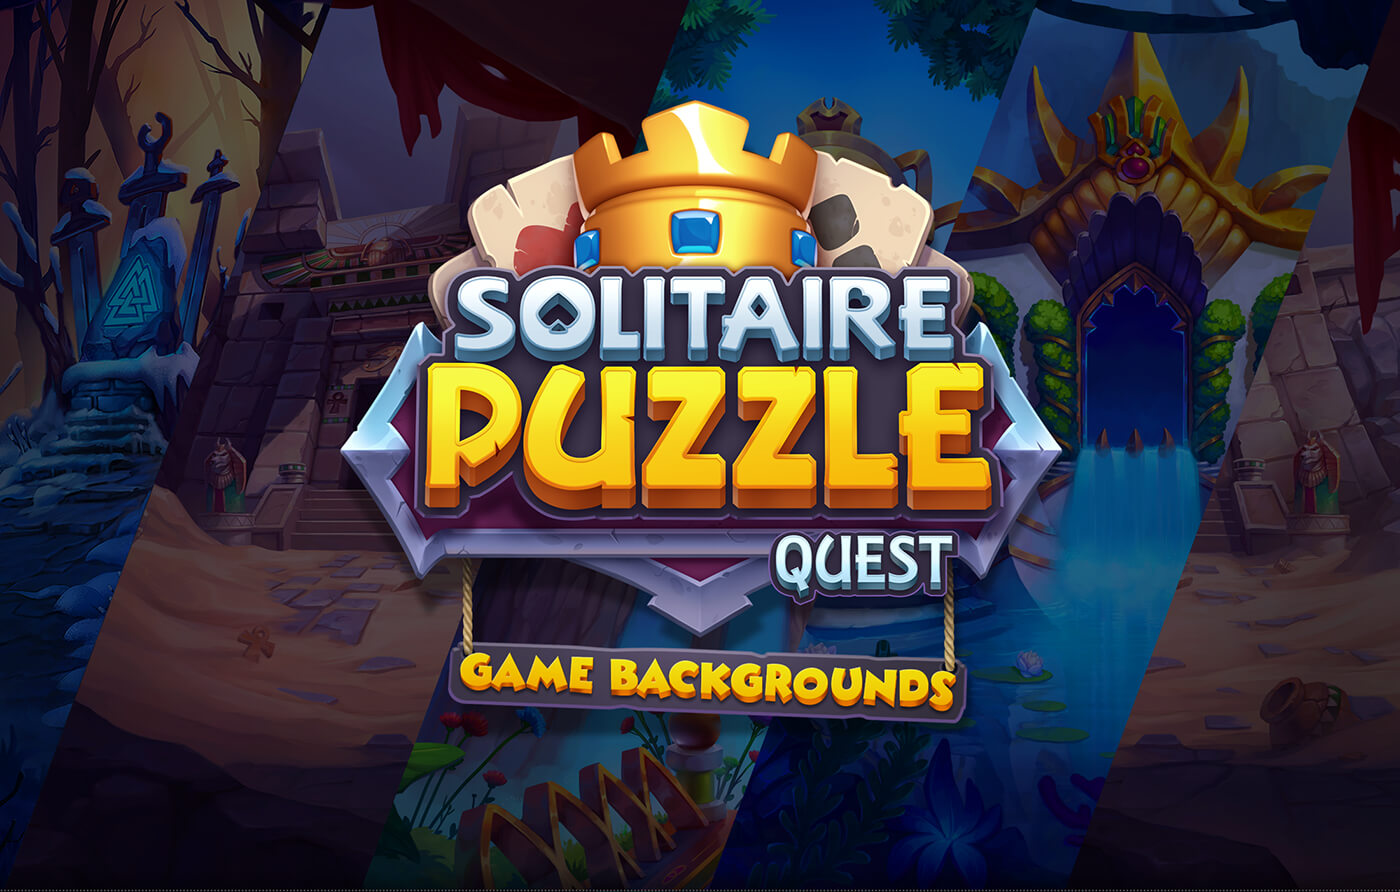 Solitaire Puzzle game backgrounds